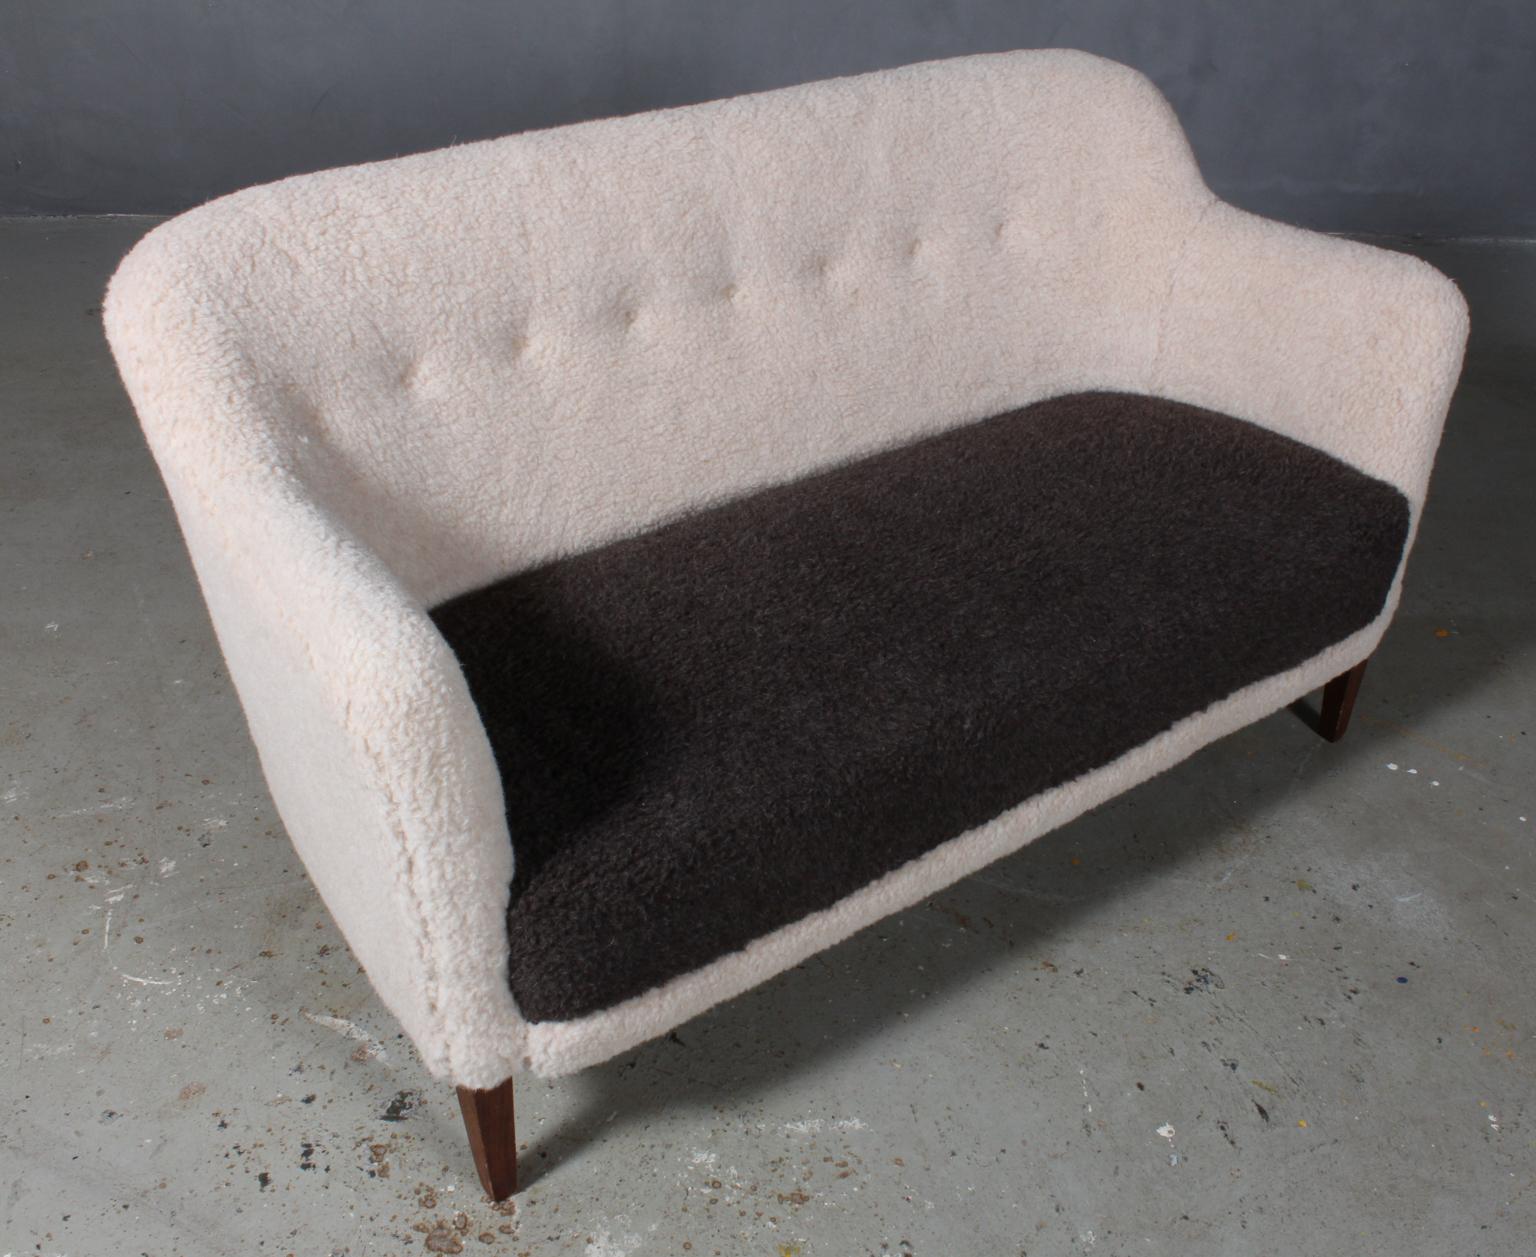 Danish cabinetmaker two-seat sofa new upholstered with two-tone lambwool.

Legs of stained oak

Made in the 1940s.